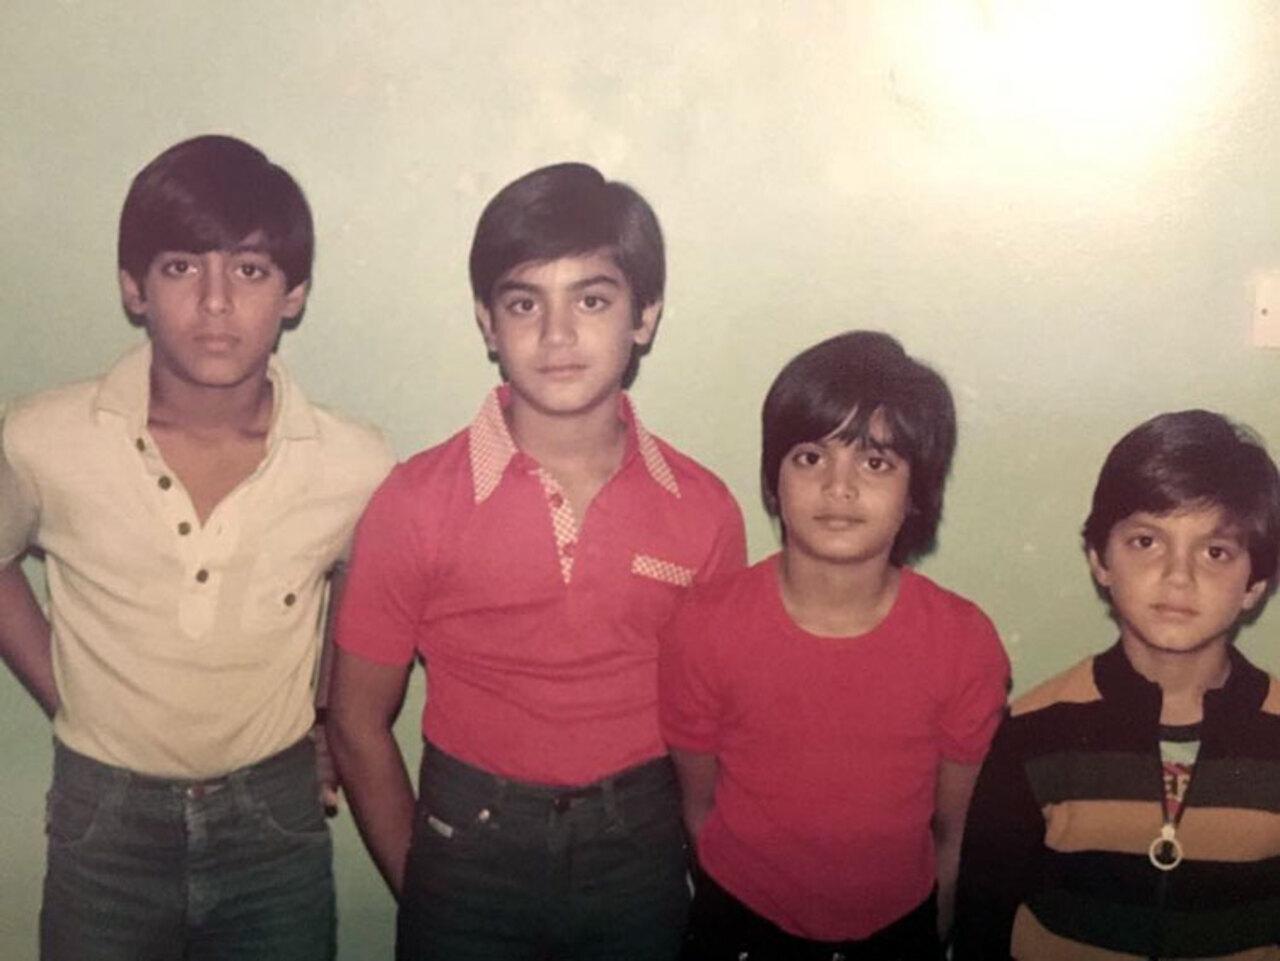 Salman Khan, Arbaaz Khan, Alvira, and Sohail Khan look like the most trendy, matching siblings in town. Is that height difference adorable or what?